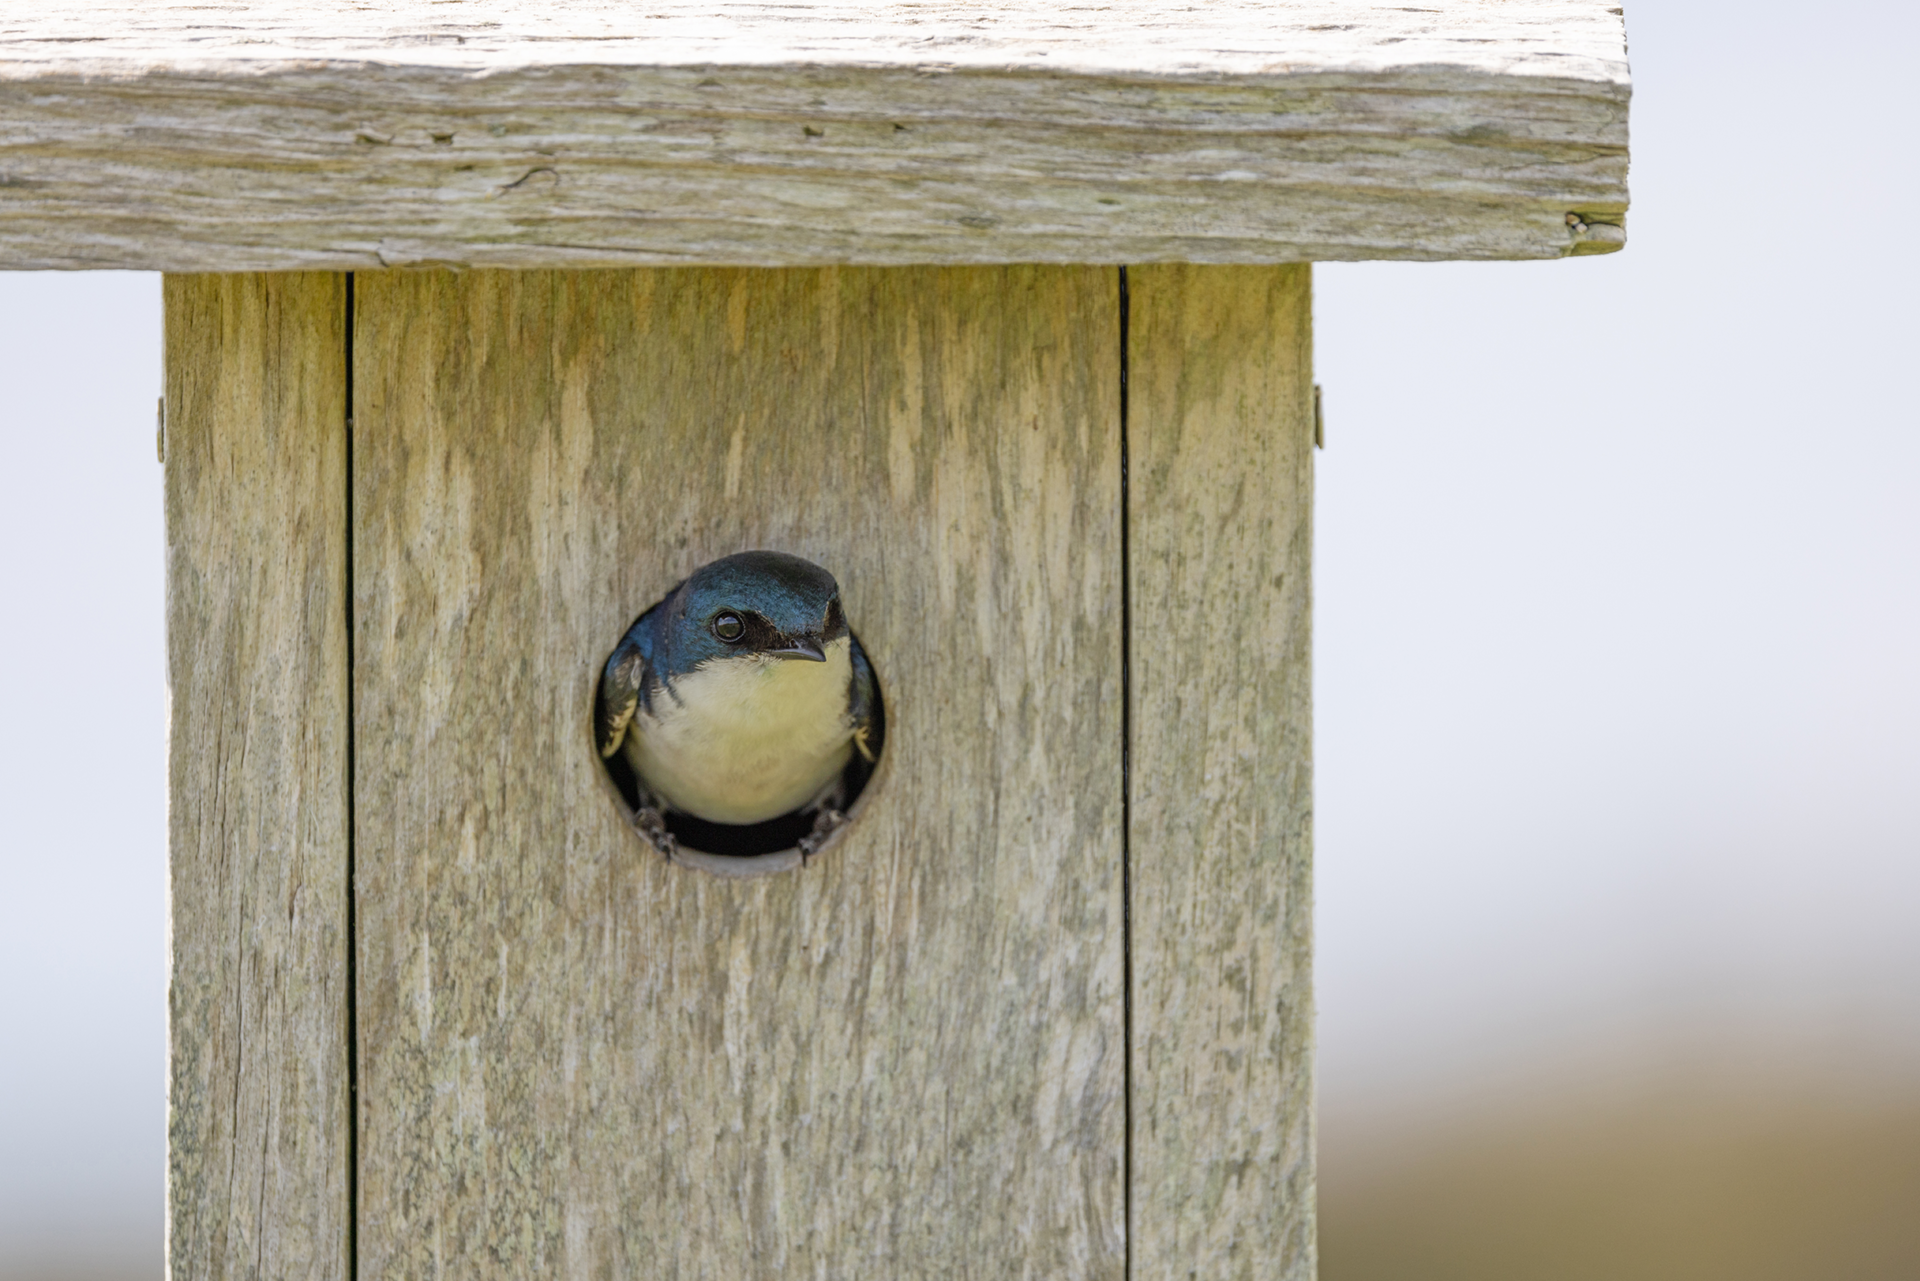 Tree swallow resting in the entrance of a bird box